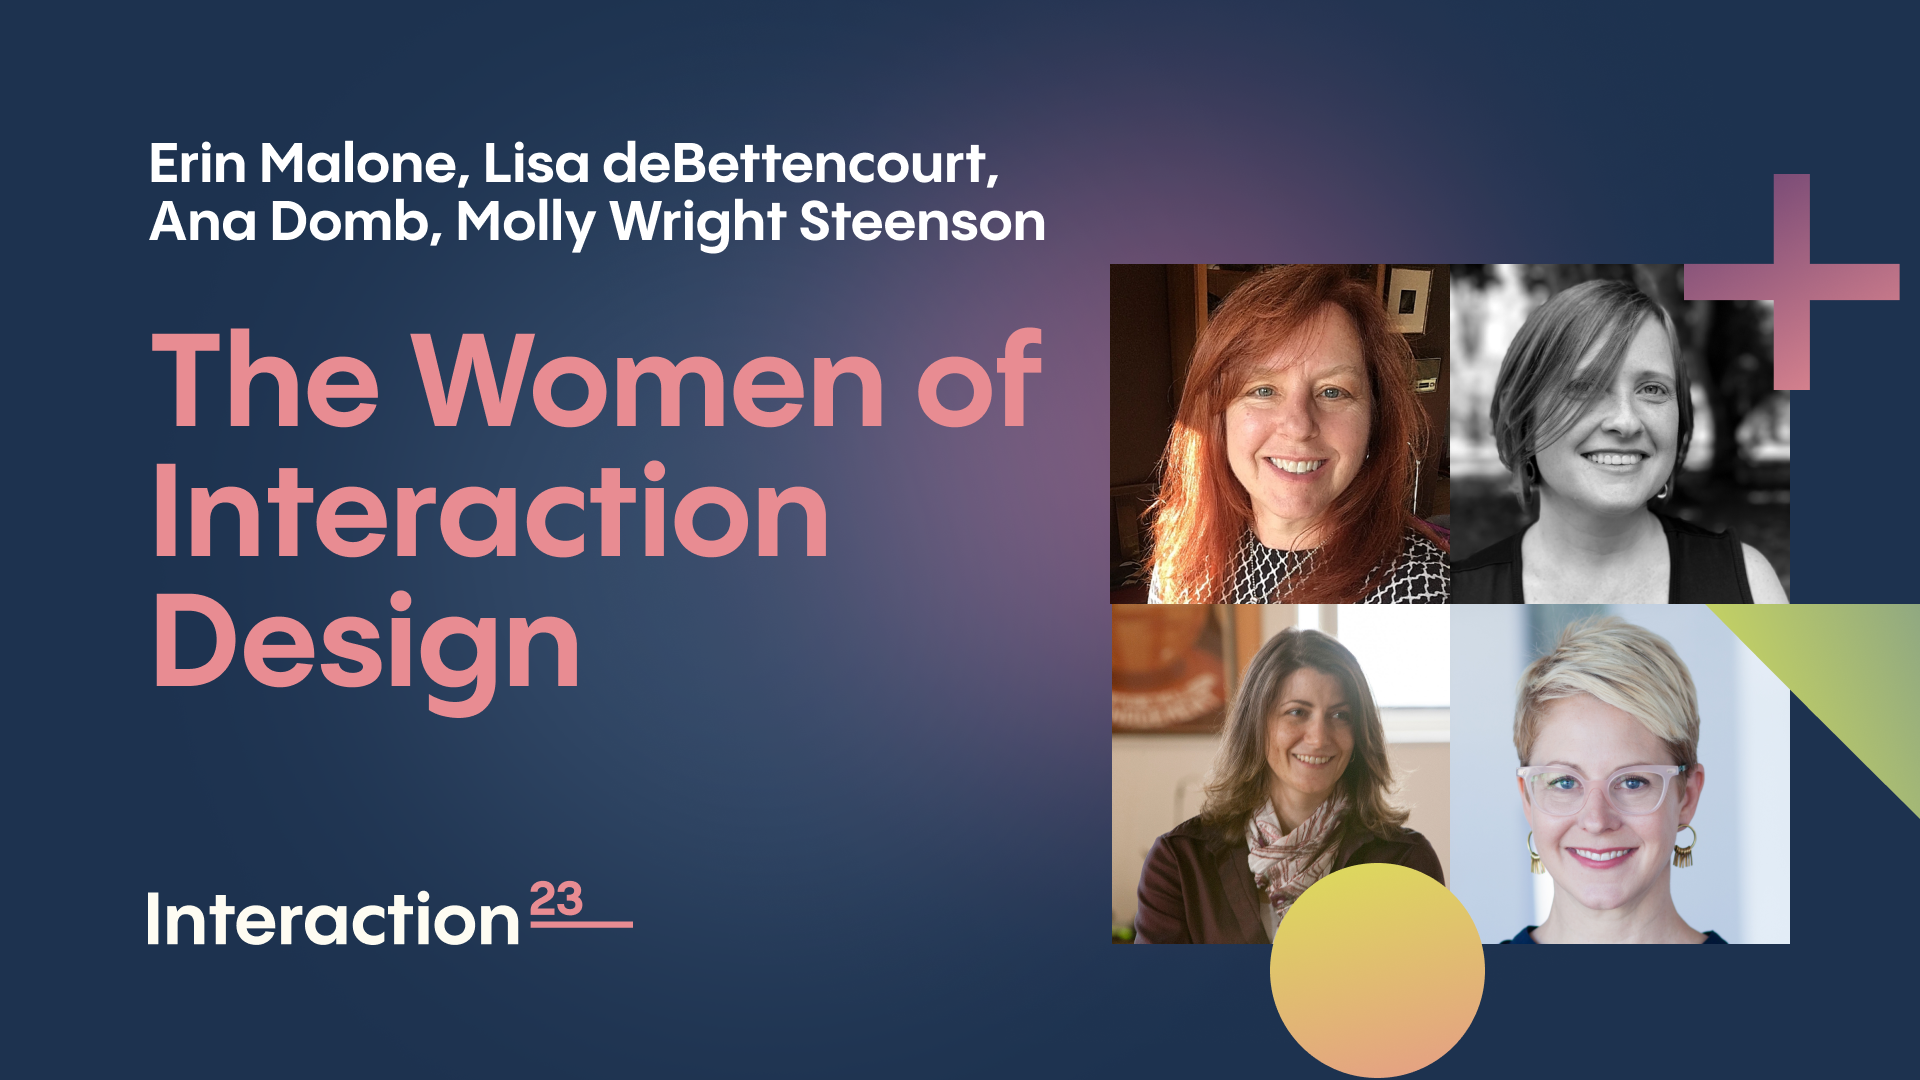 The Women of Interaction Design